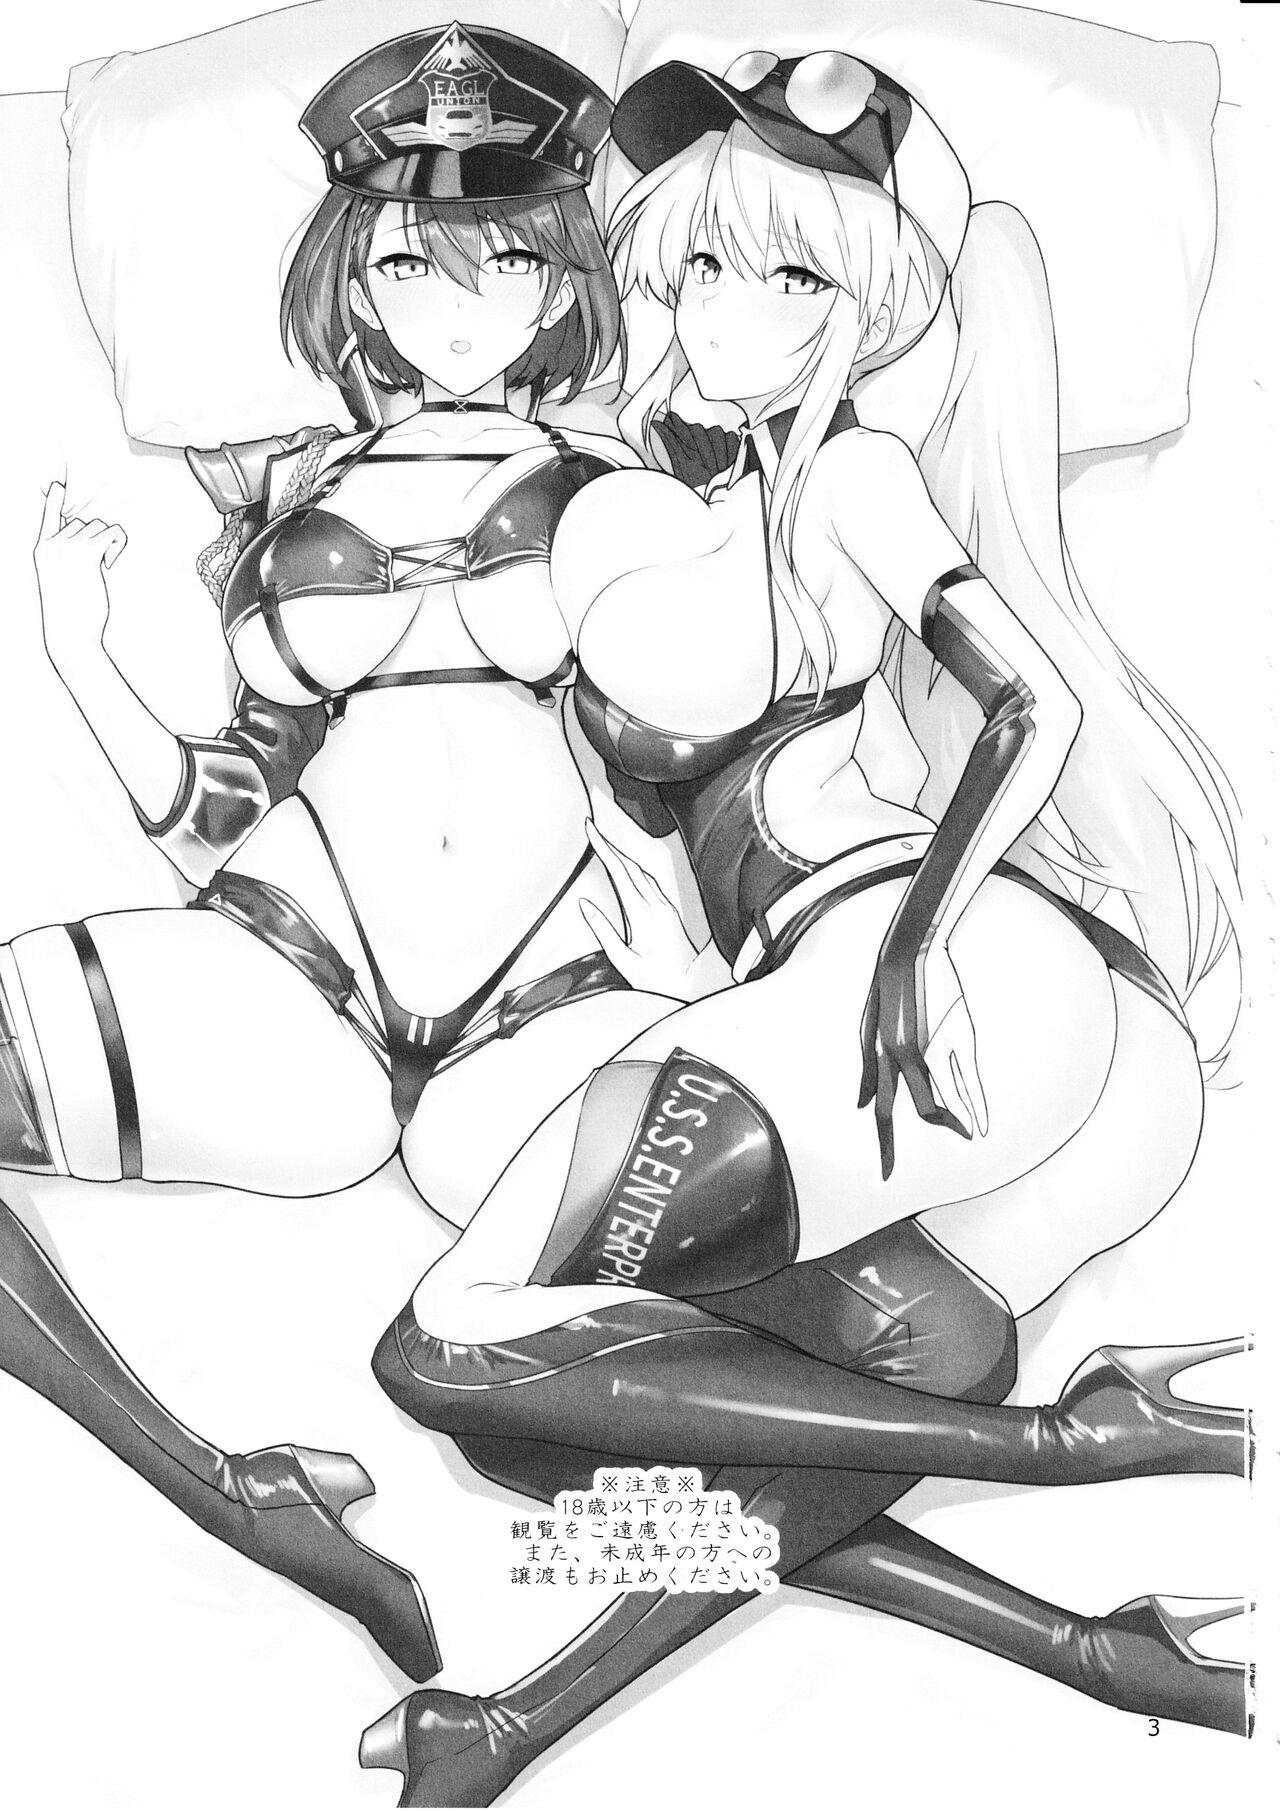 Couple A Book about Race Queens Enterprise and Baltimore being Lewd - Azur lane Breeding - Picture 2